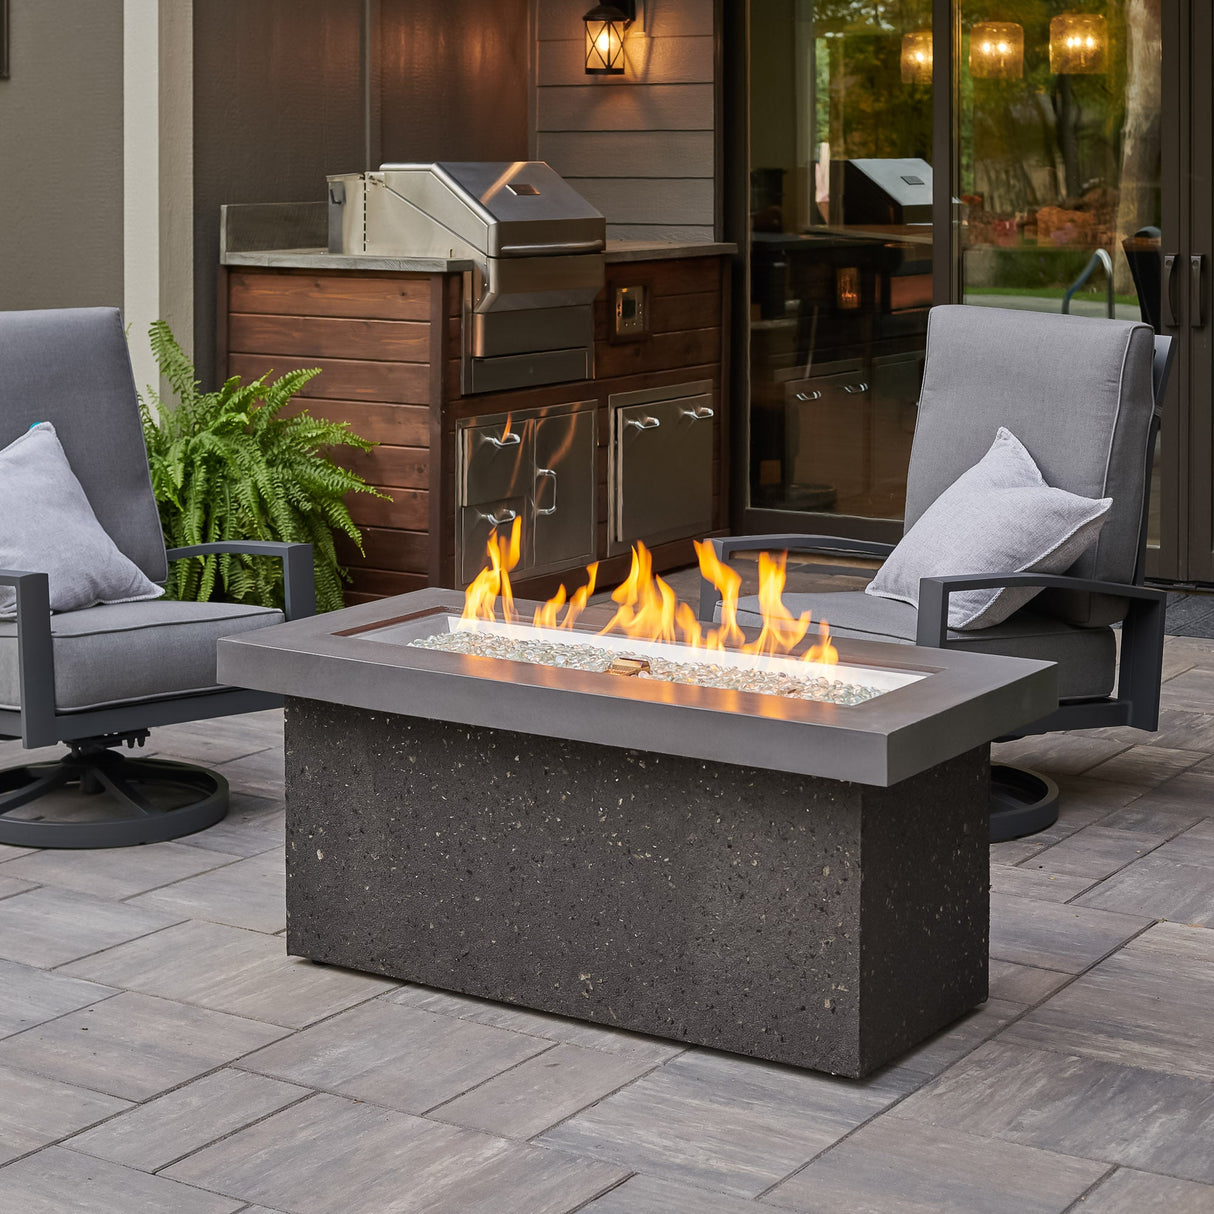 Midnight Mist Key Largo Linear Gas Fire Pit Table outside and surrounded by patio furniture